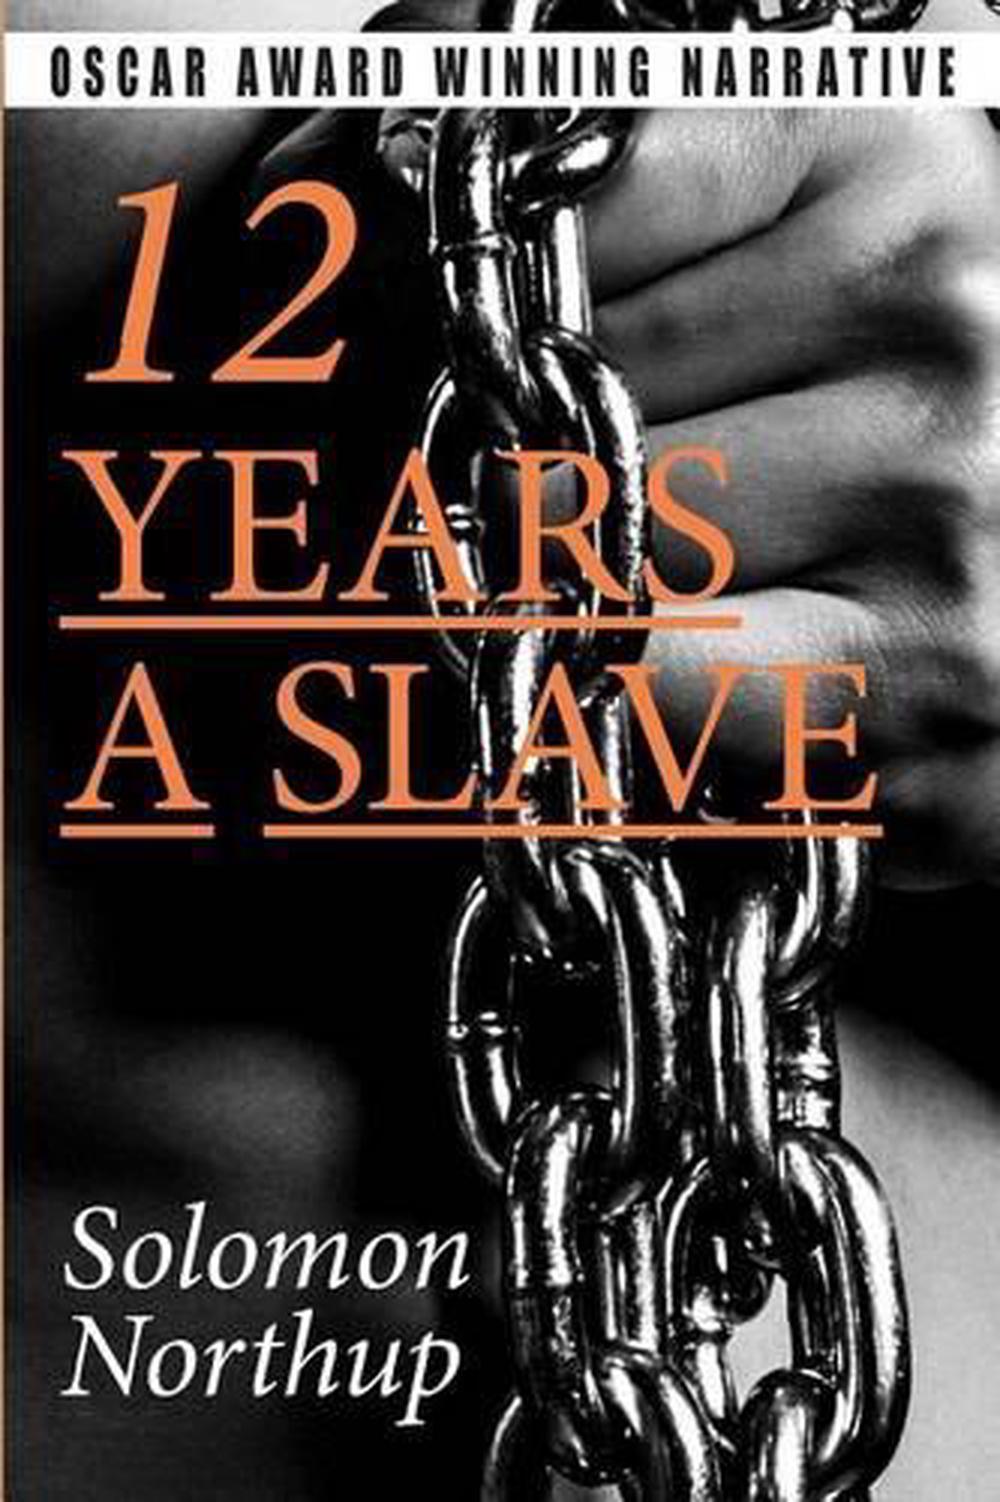 Twelve Years a Slave by Solomon Northup